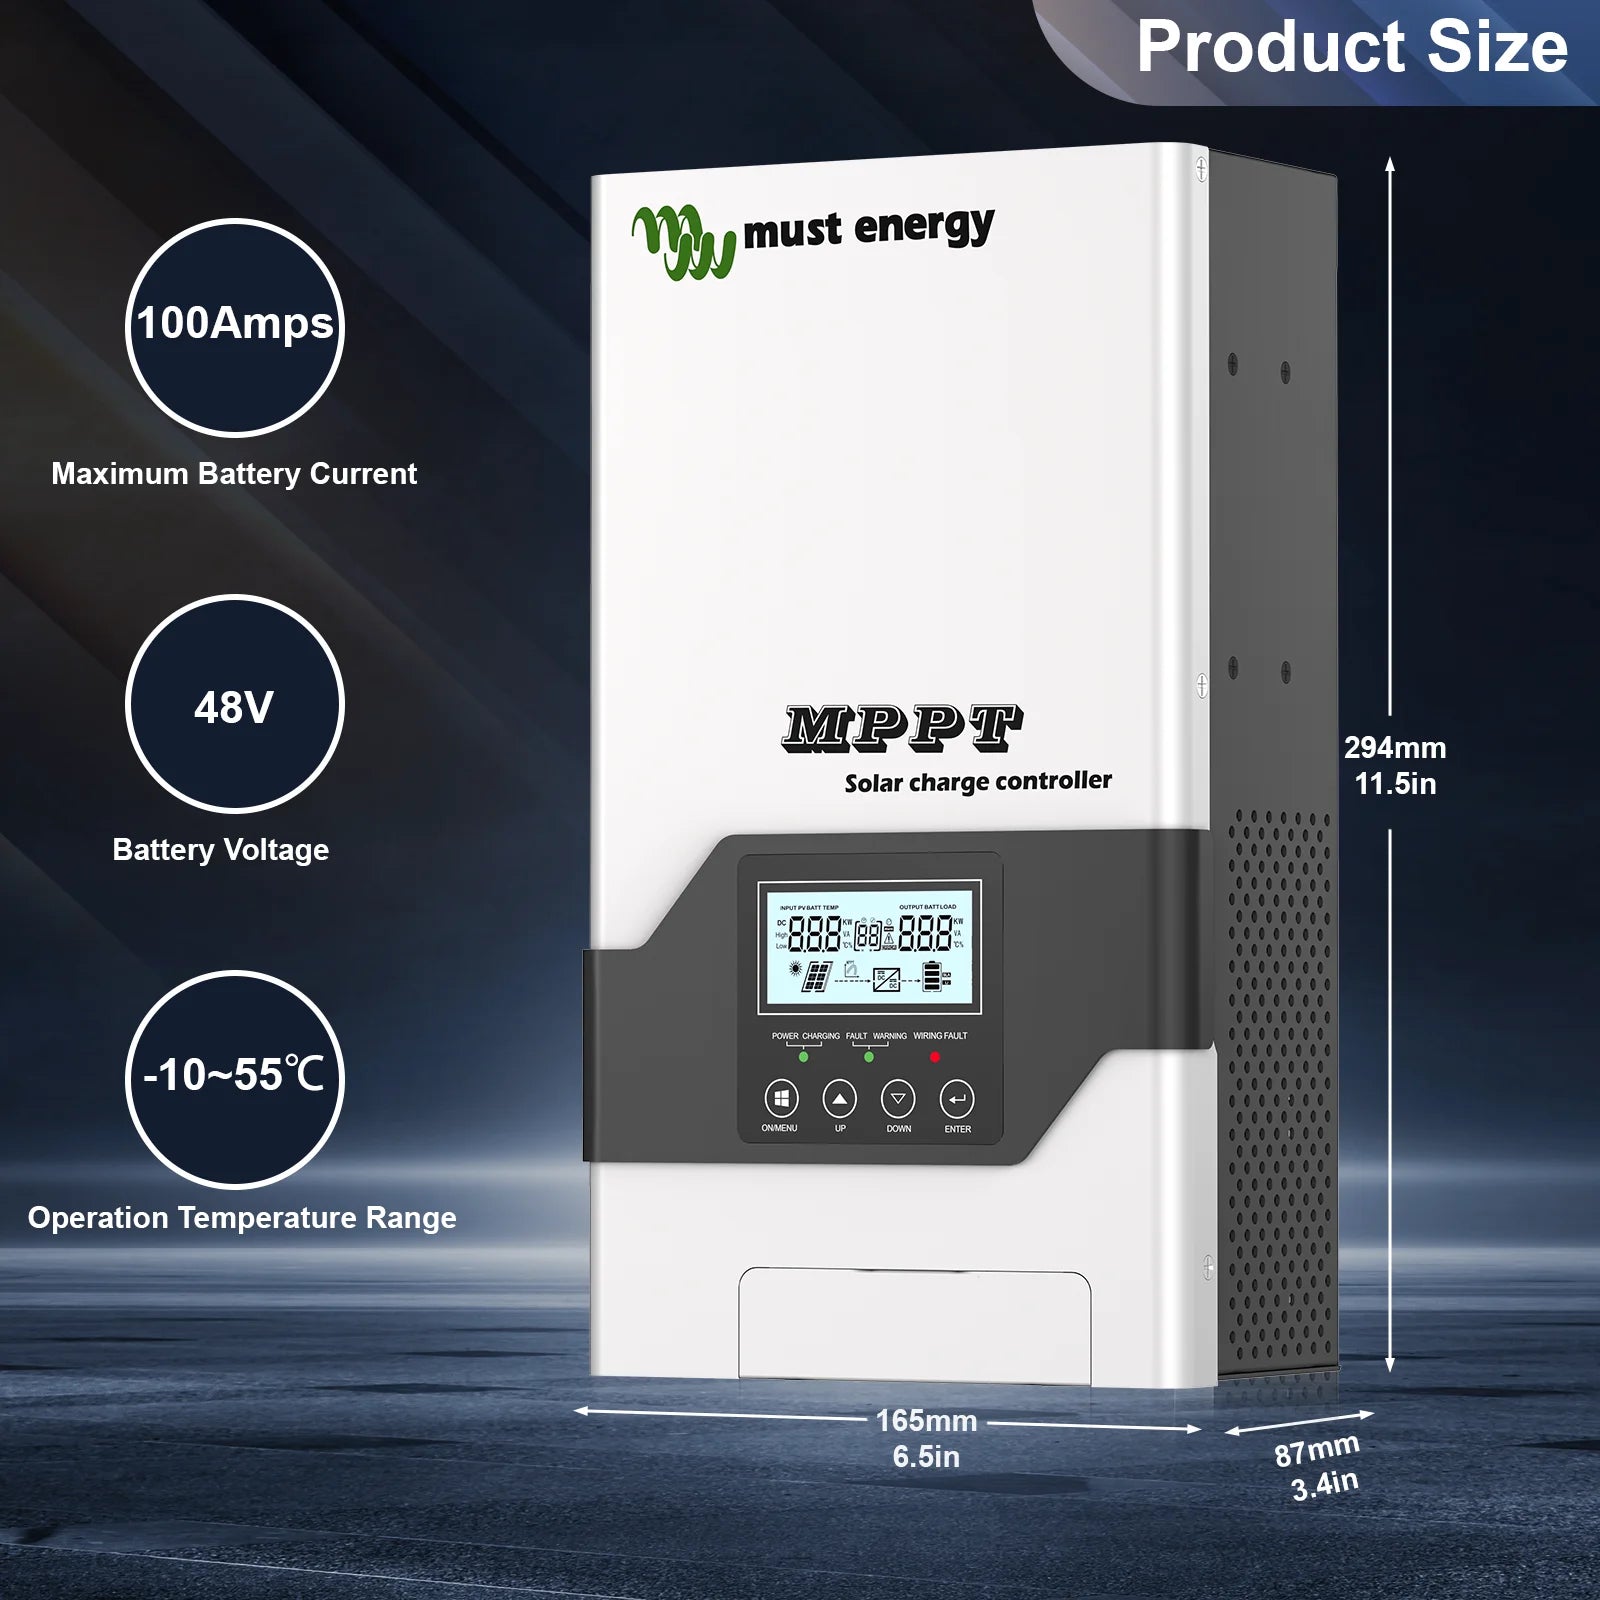 MUST ENERGY 80A 100A MPPT Solar Charge Controller, MUST Energy's 100A MPPT Solar Charge Controller with 11-stage protection circuit and temperature range -10°C to 55°C.